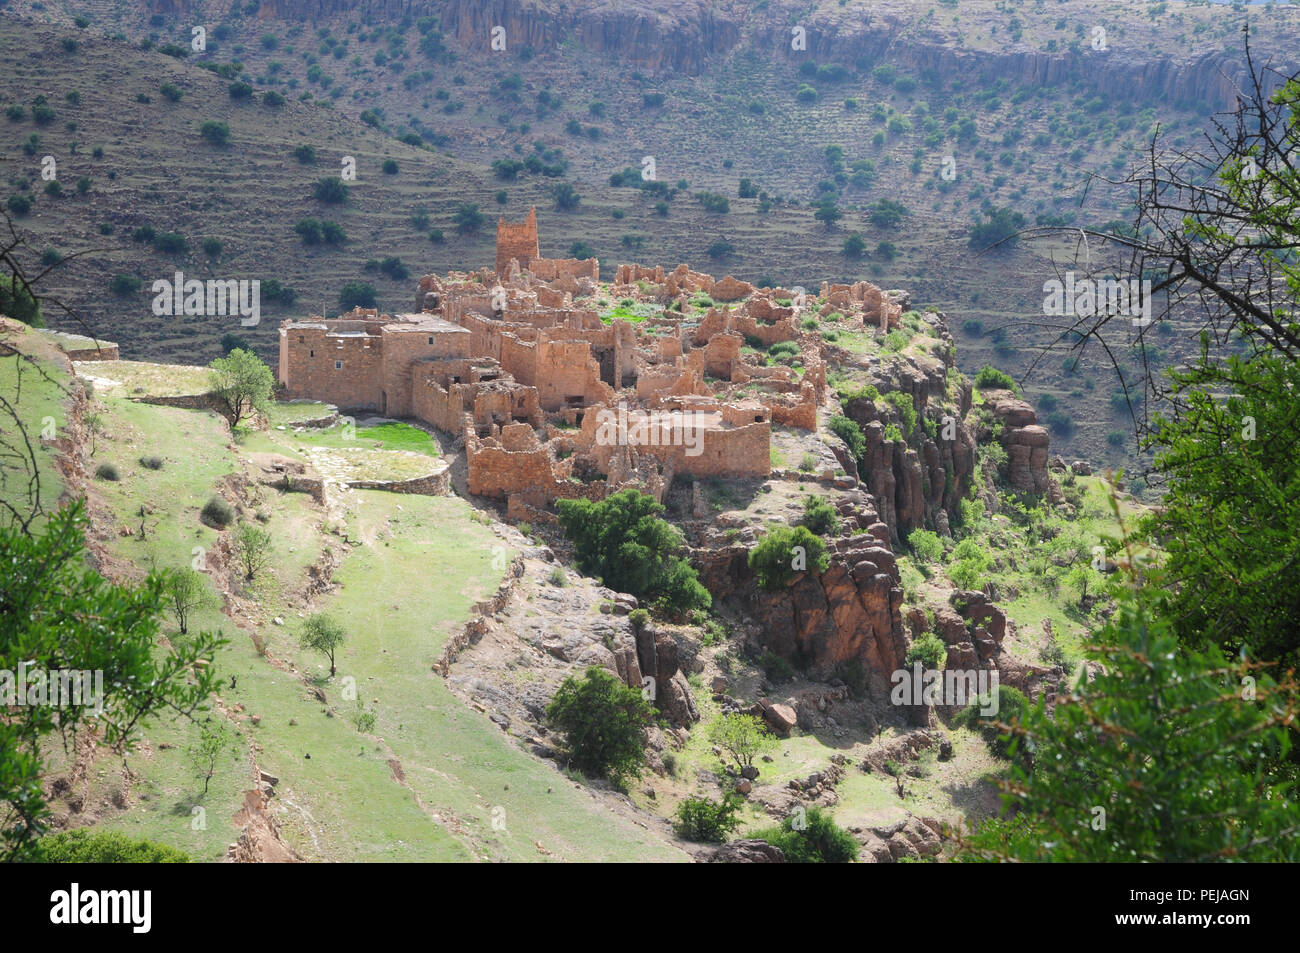 Semi-ruined Kasbah, a fortified village in the anti Atlas mountains, Morocco Stock Photo